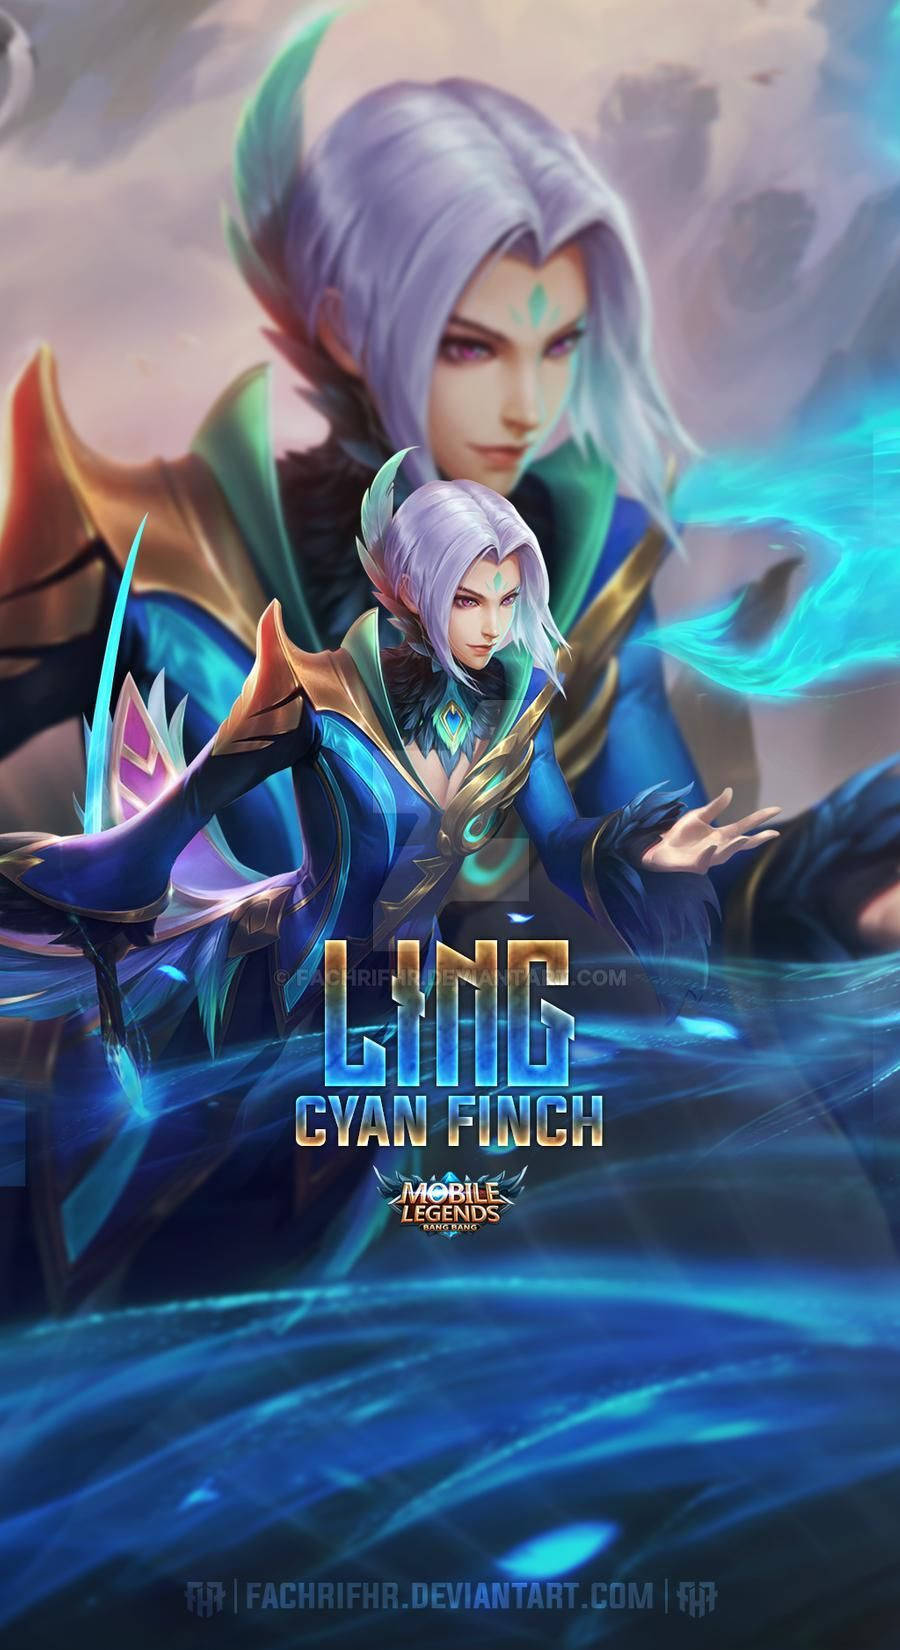 Ling Mobile Legends Cyan Finch Poster Background